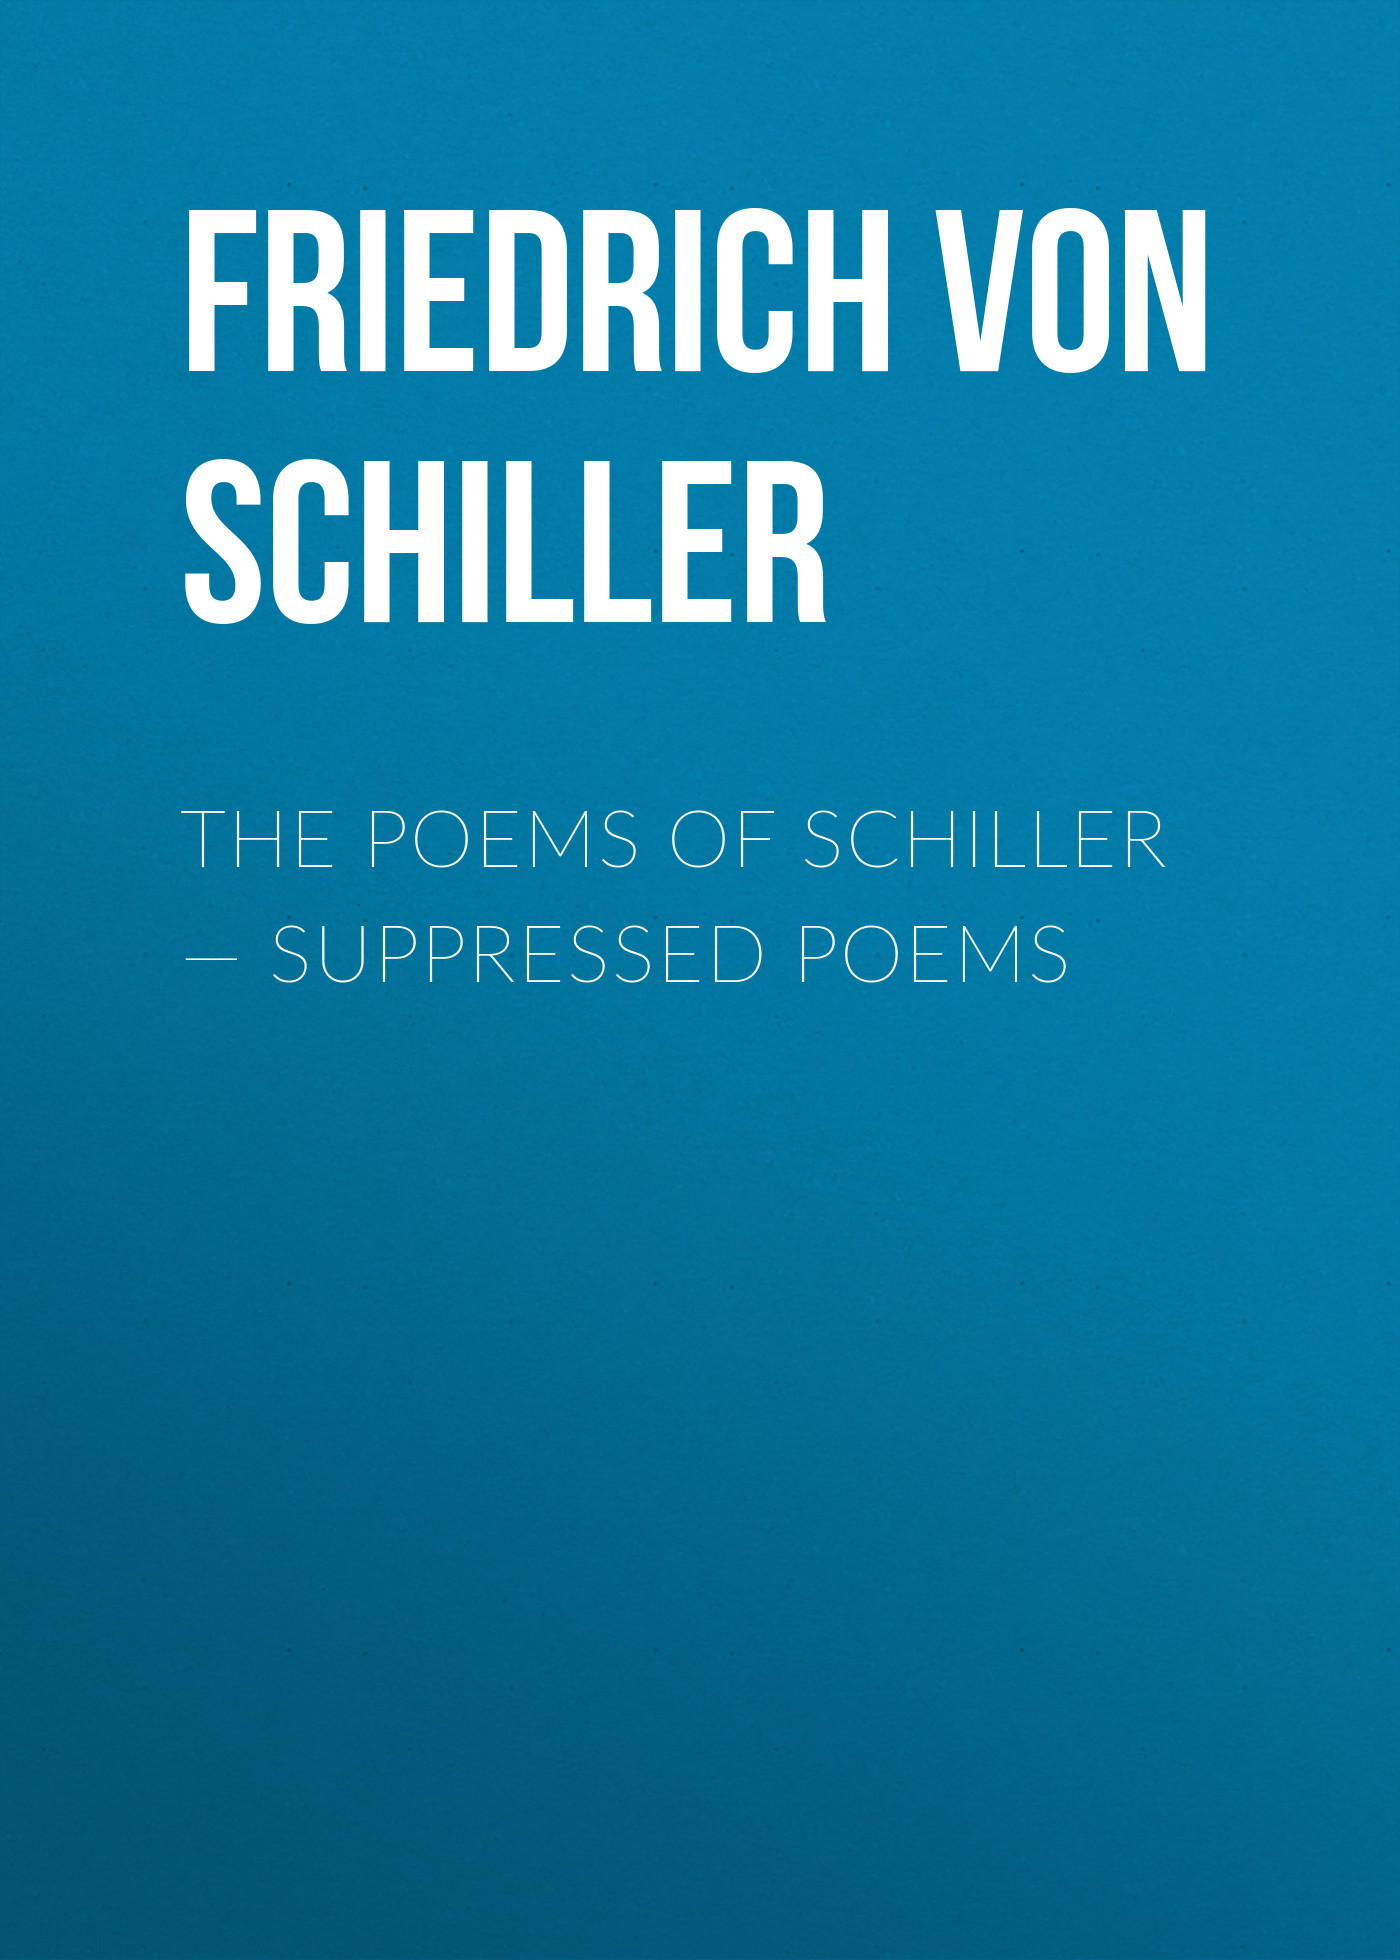 The Poems of Schiller— Suppressed poems